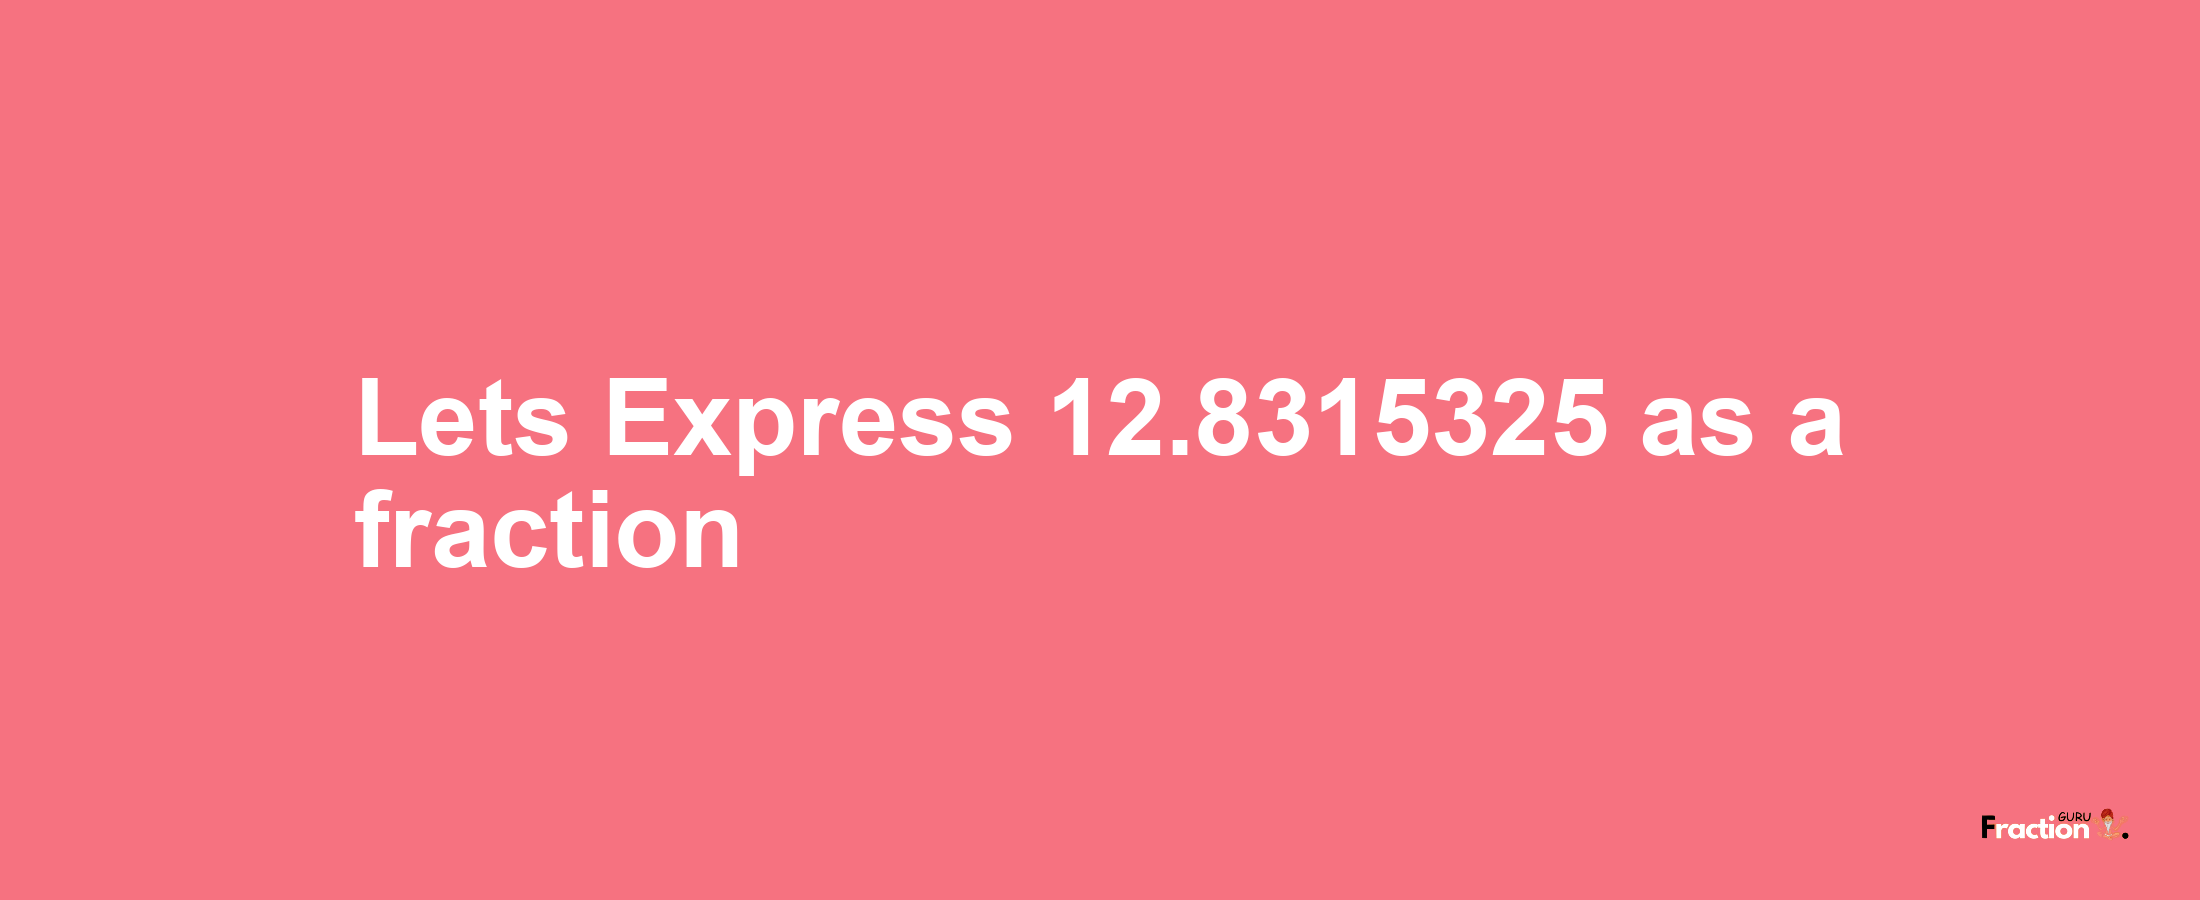 Lets Express 12.8315325 as afraction